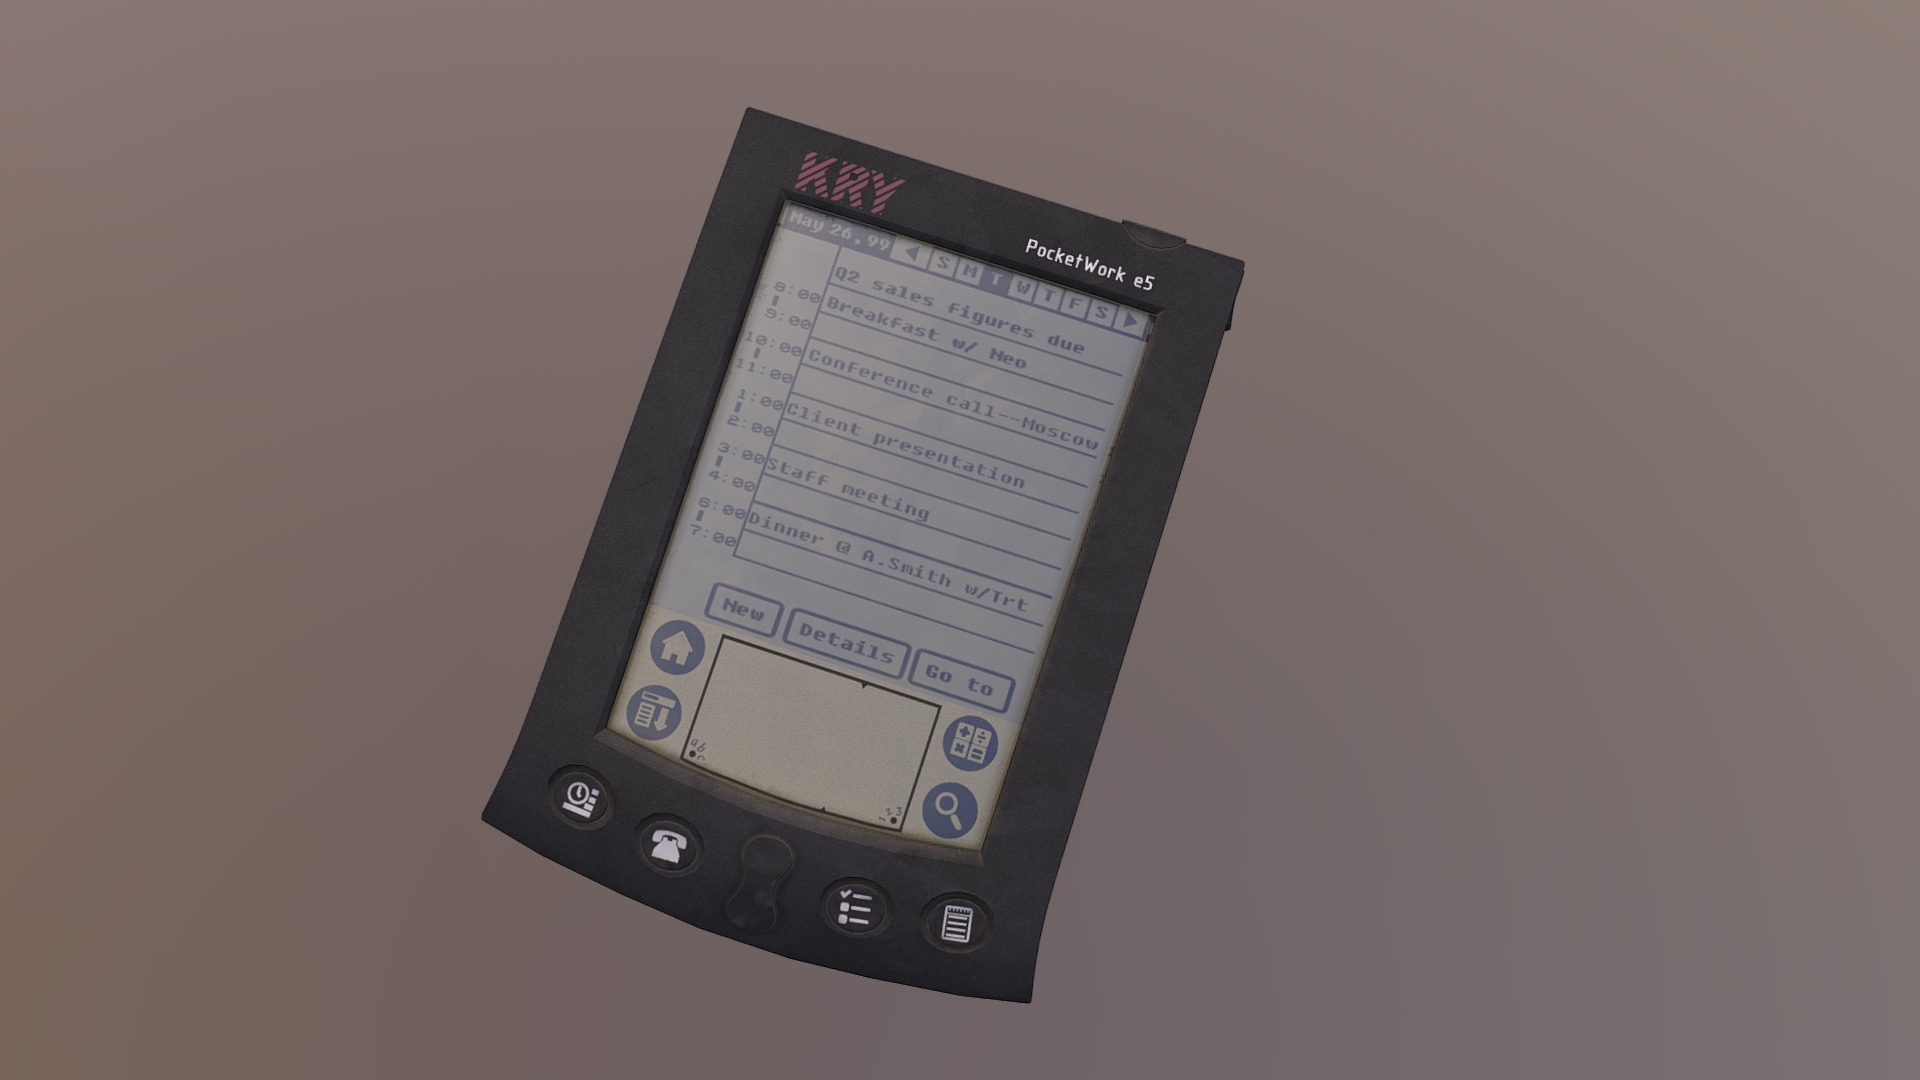 3D model Old PDA (1990s) - This is a 3D model of the Old PDA (1990s). The 3D model is about a black rectangular device with a screen.